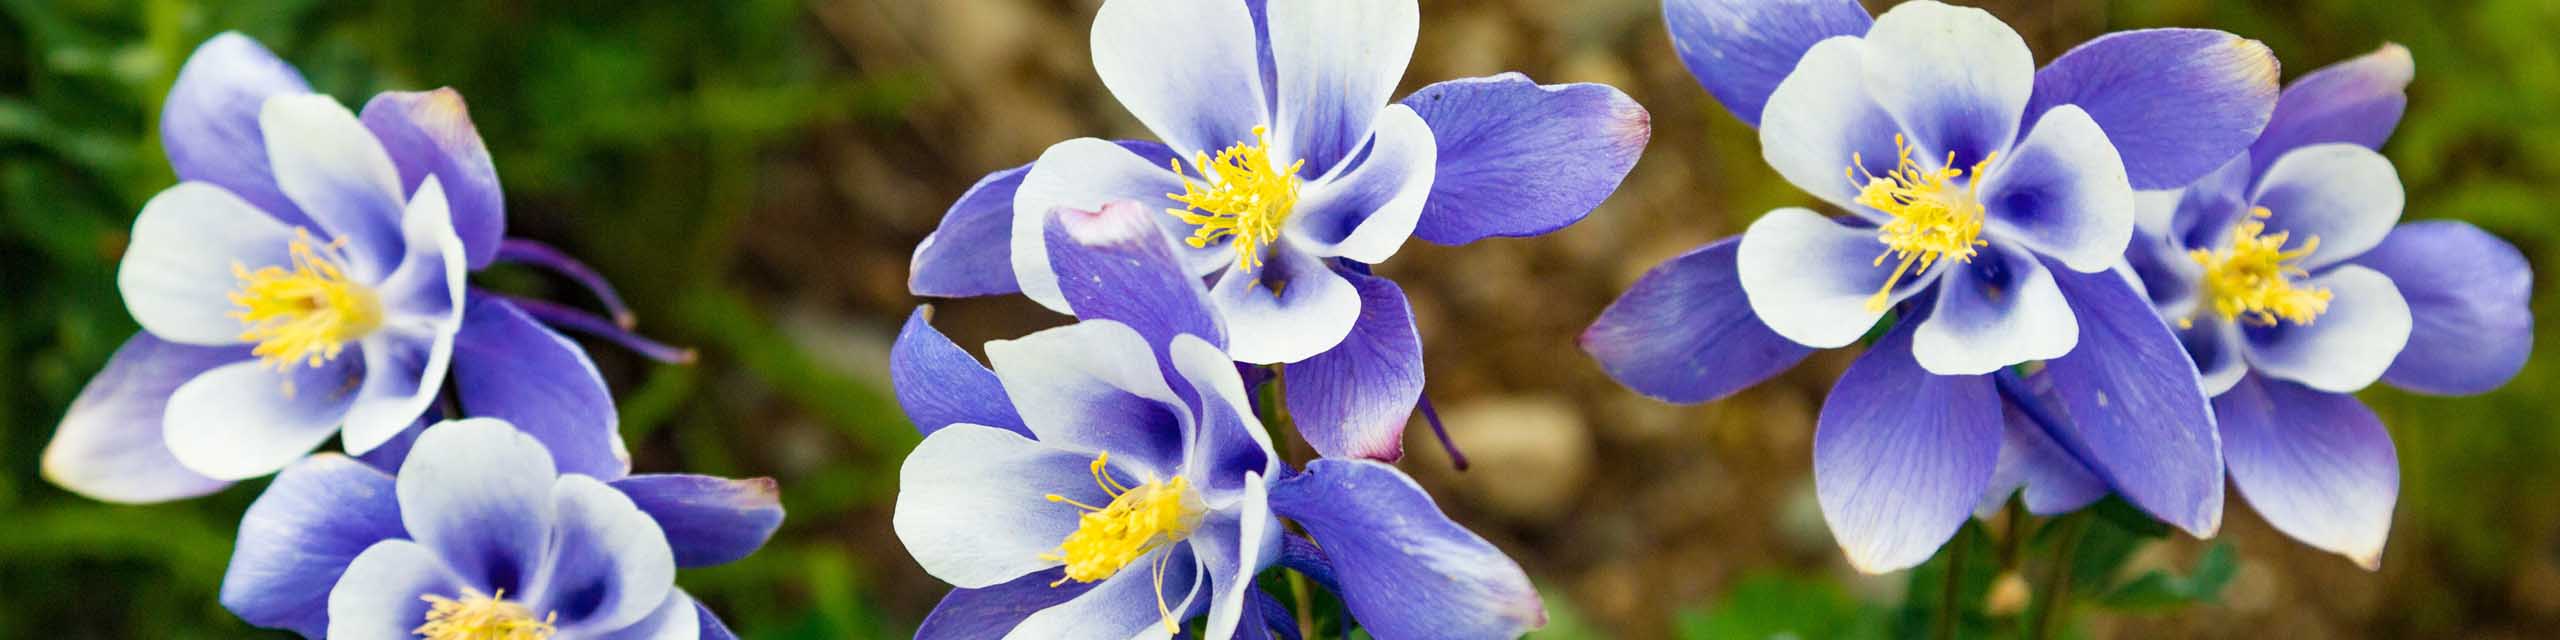 A row of blue and white columbine flowers.